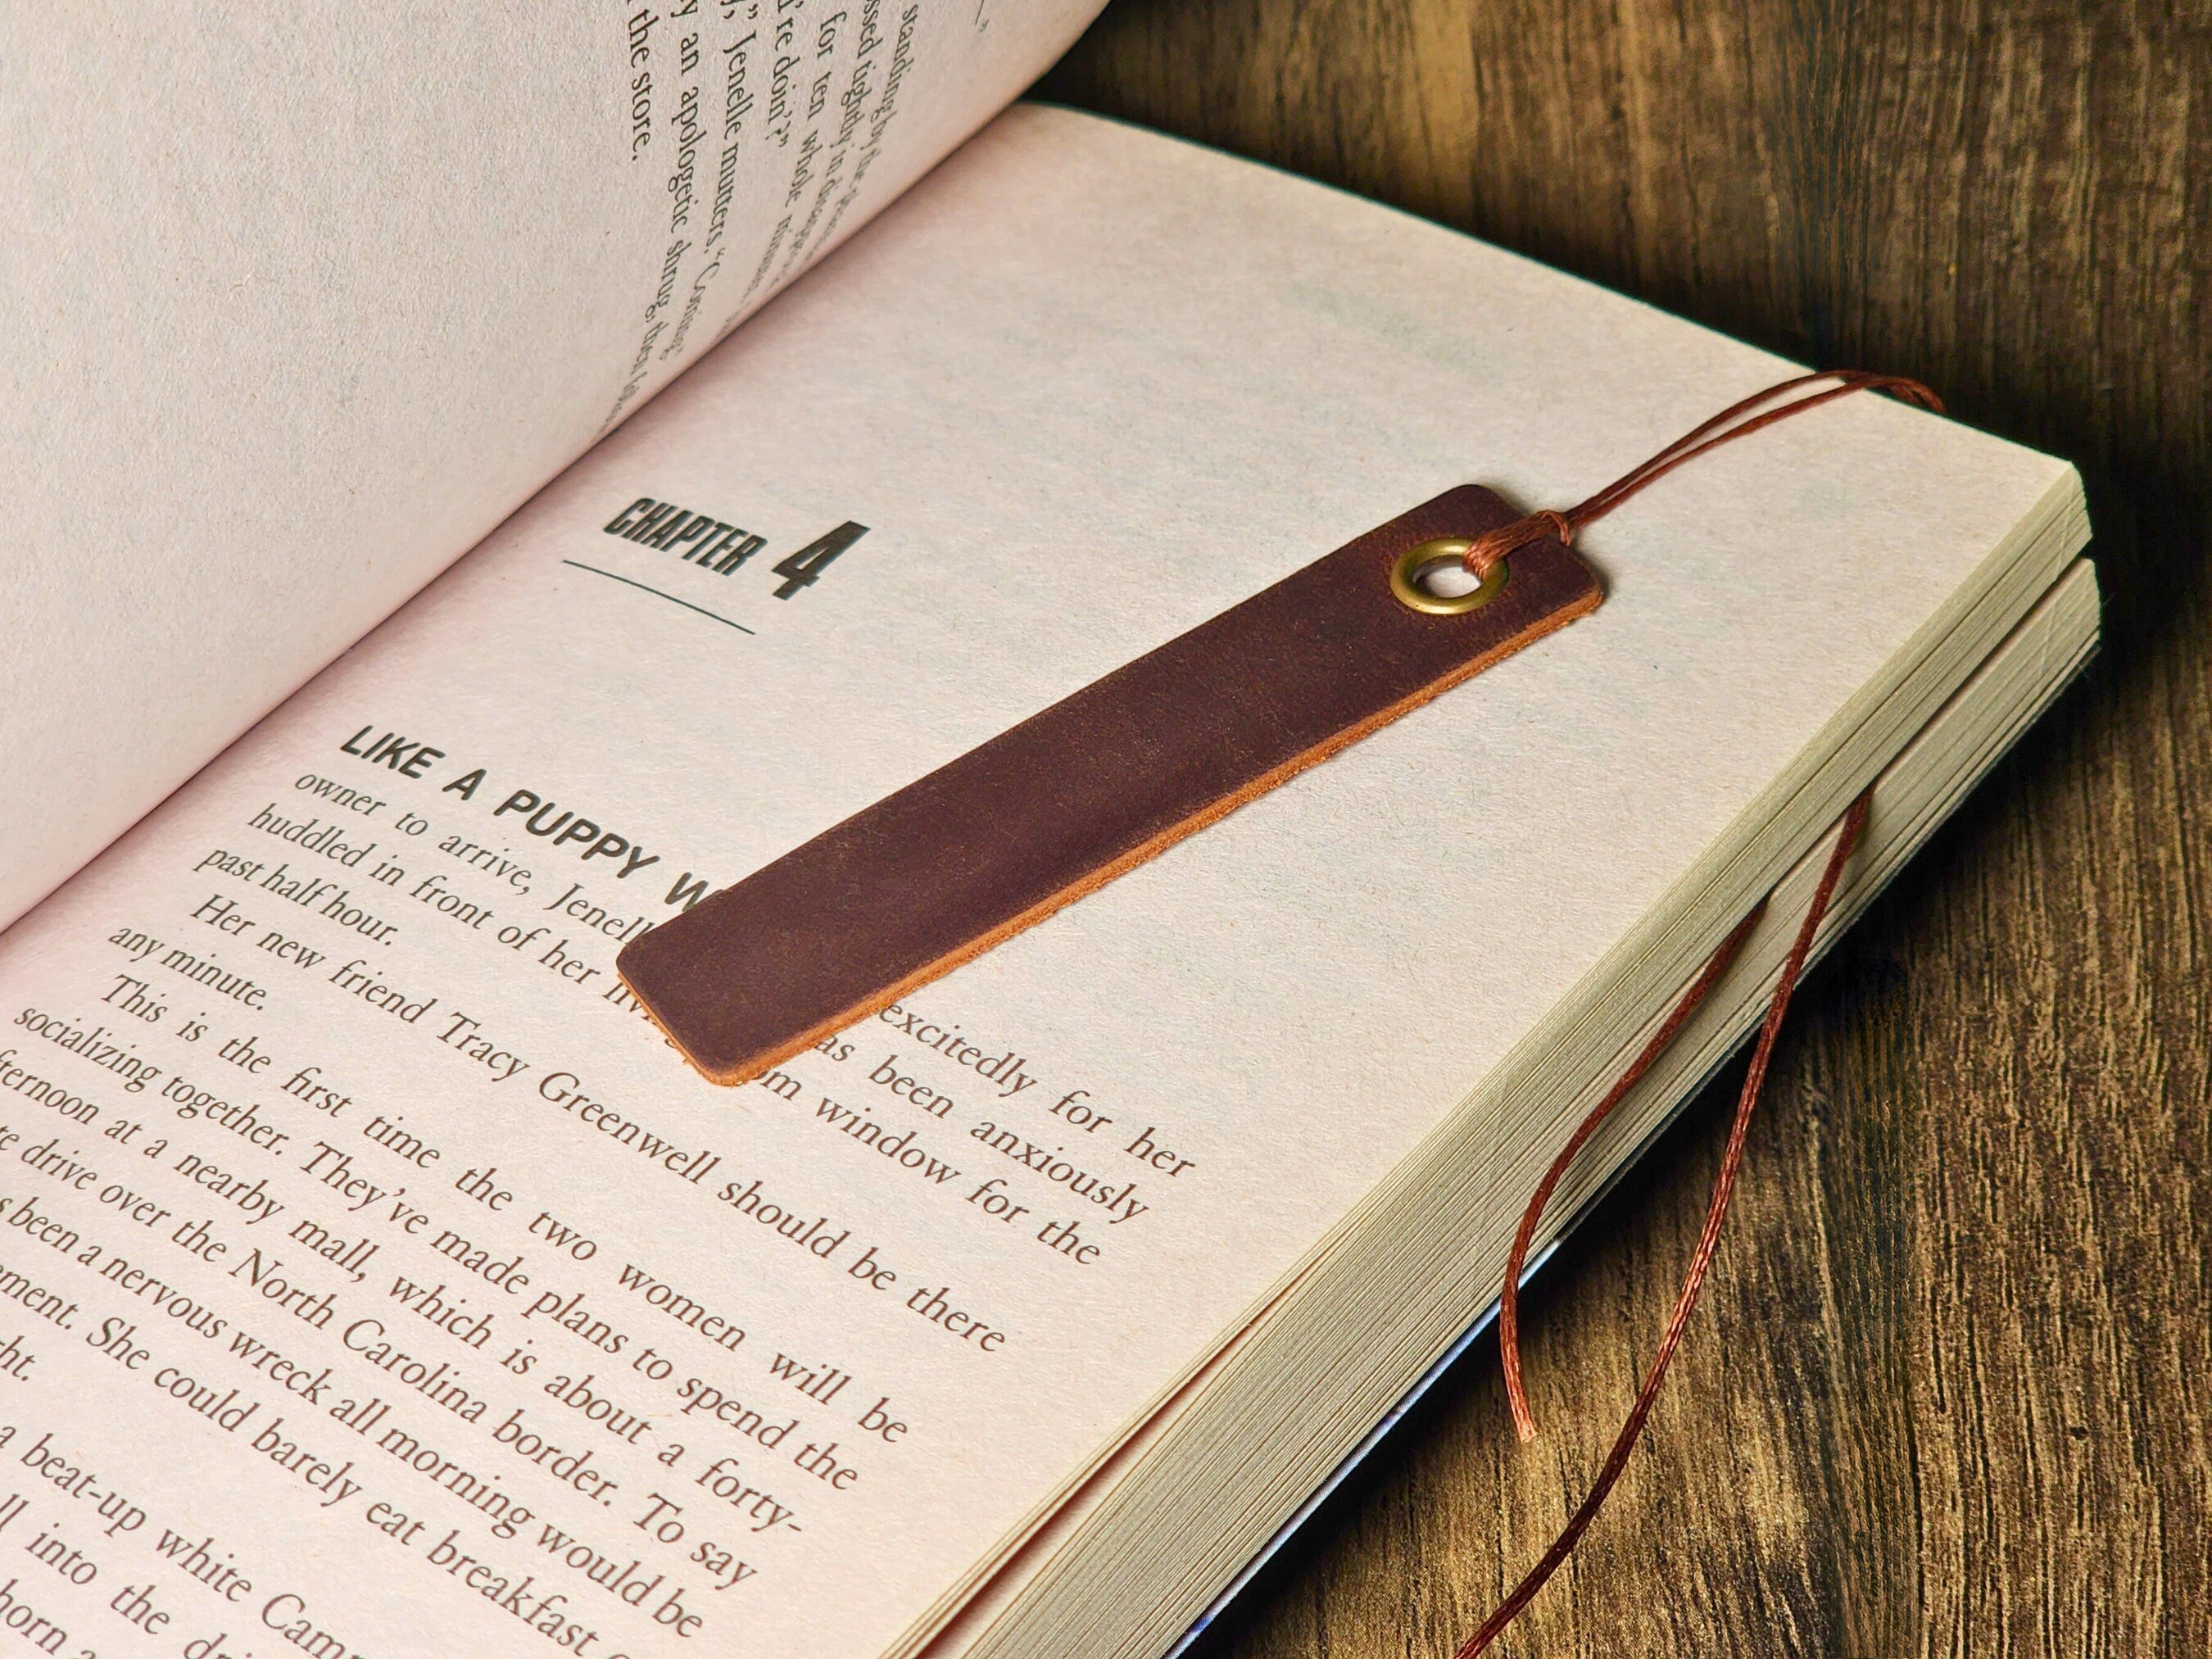 Script, Personalized leather Bookmark made with Crazy Horse Leather, Minimalistic, Birthday Anniversary Gift, For Him/Her| Vintage Cowhide